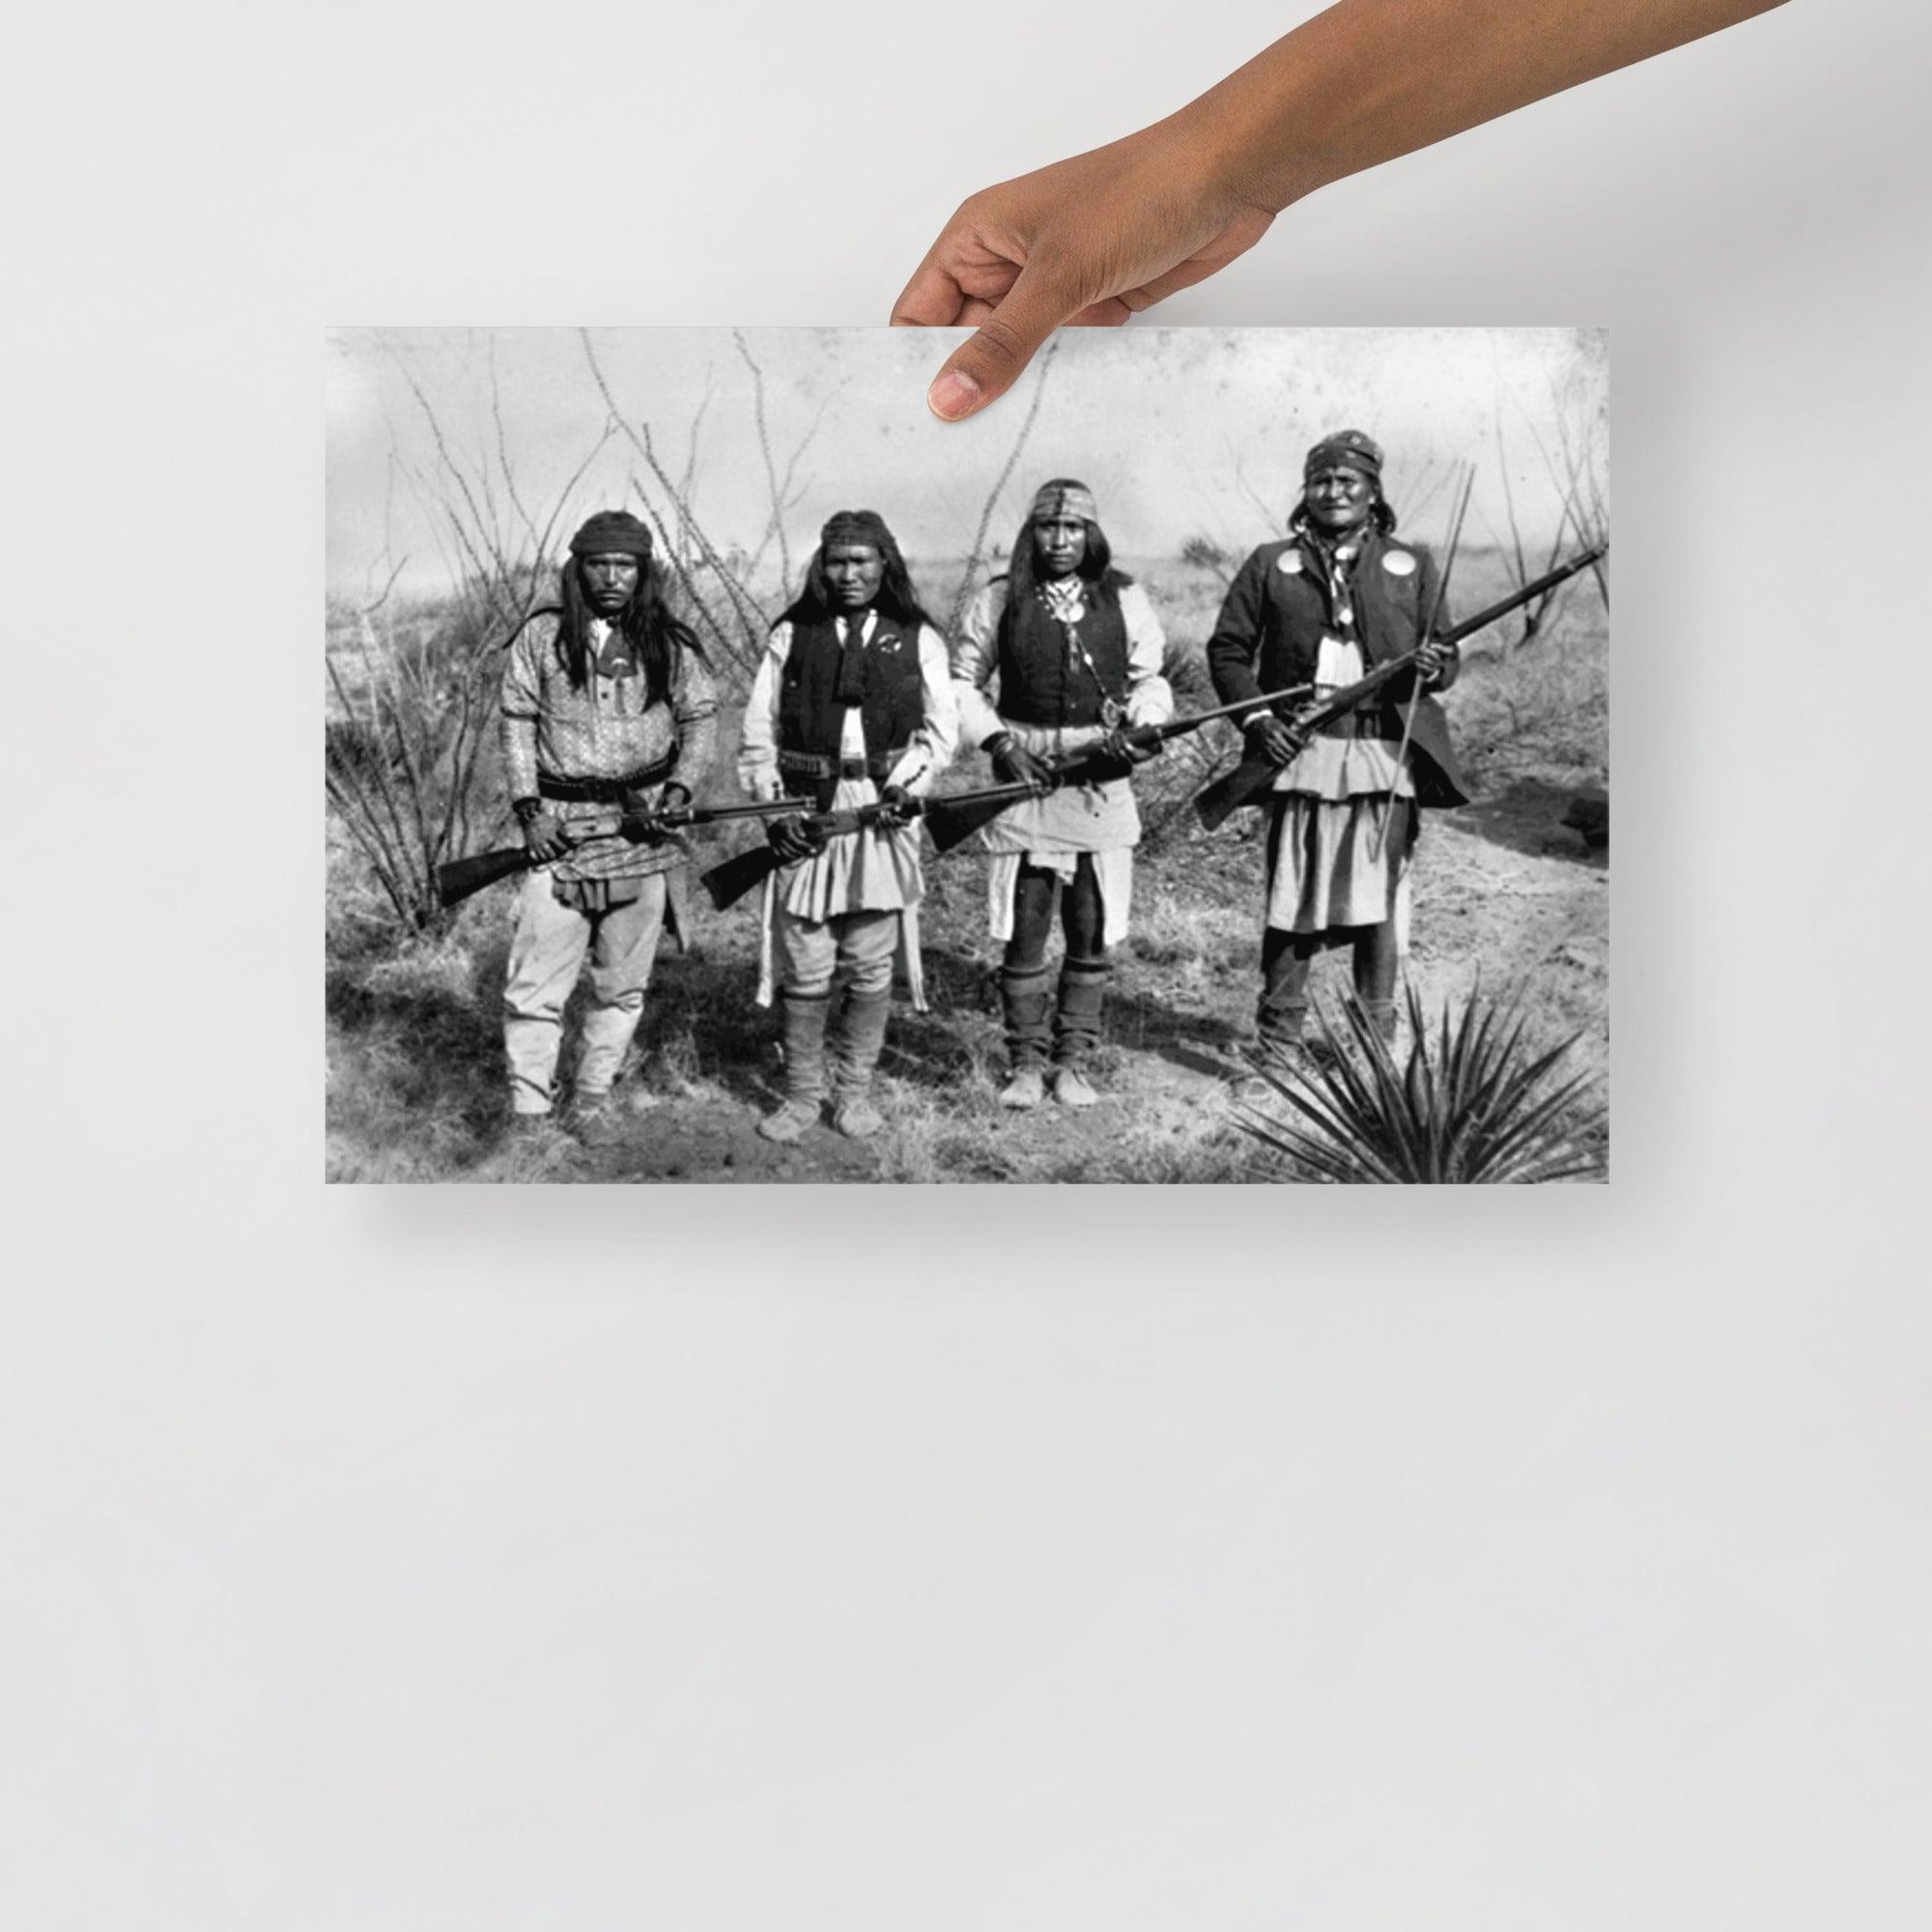 A Geronimo and His Warriors poster on a plain backdrop in size 12x18”.